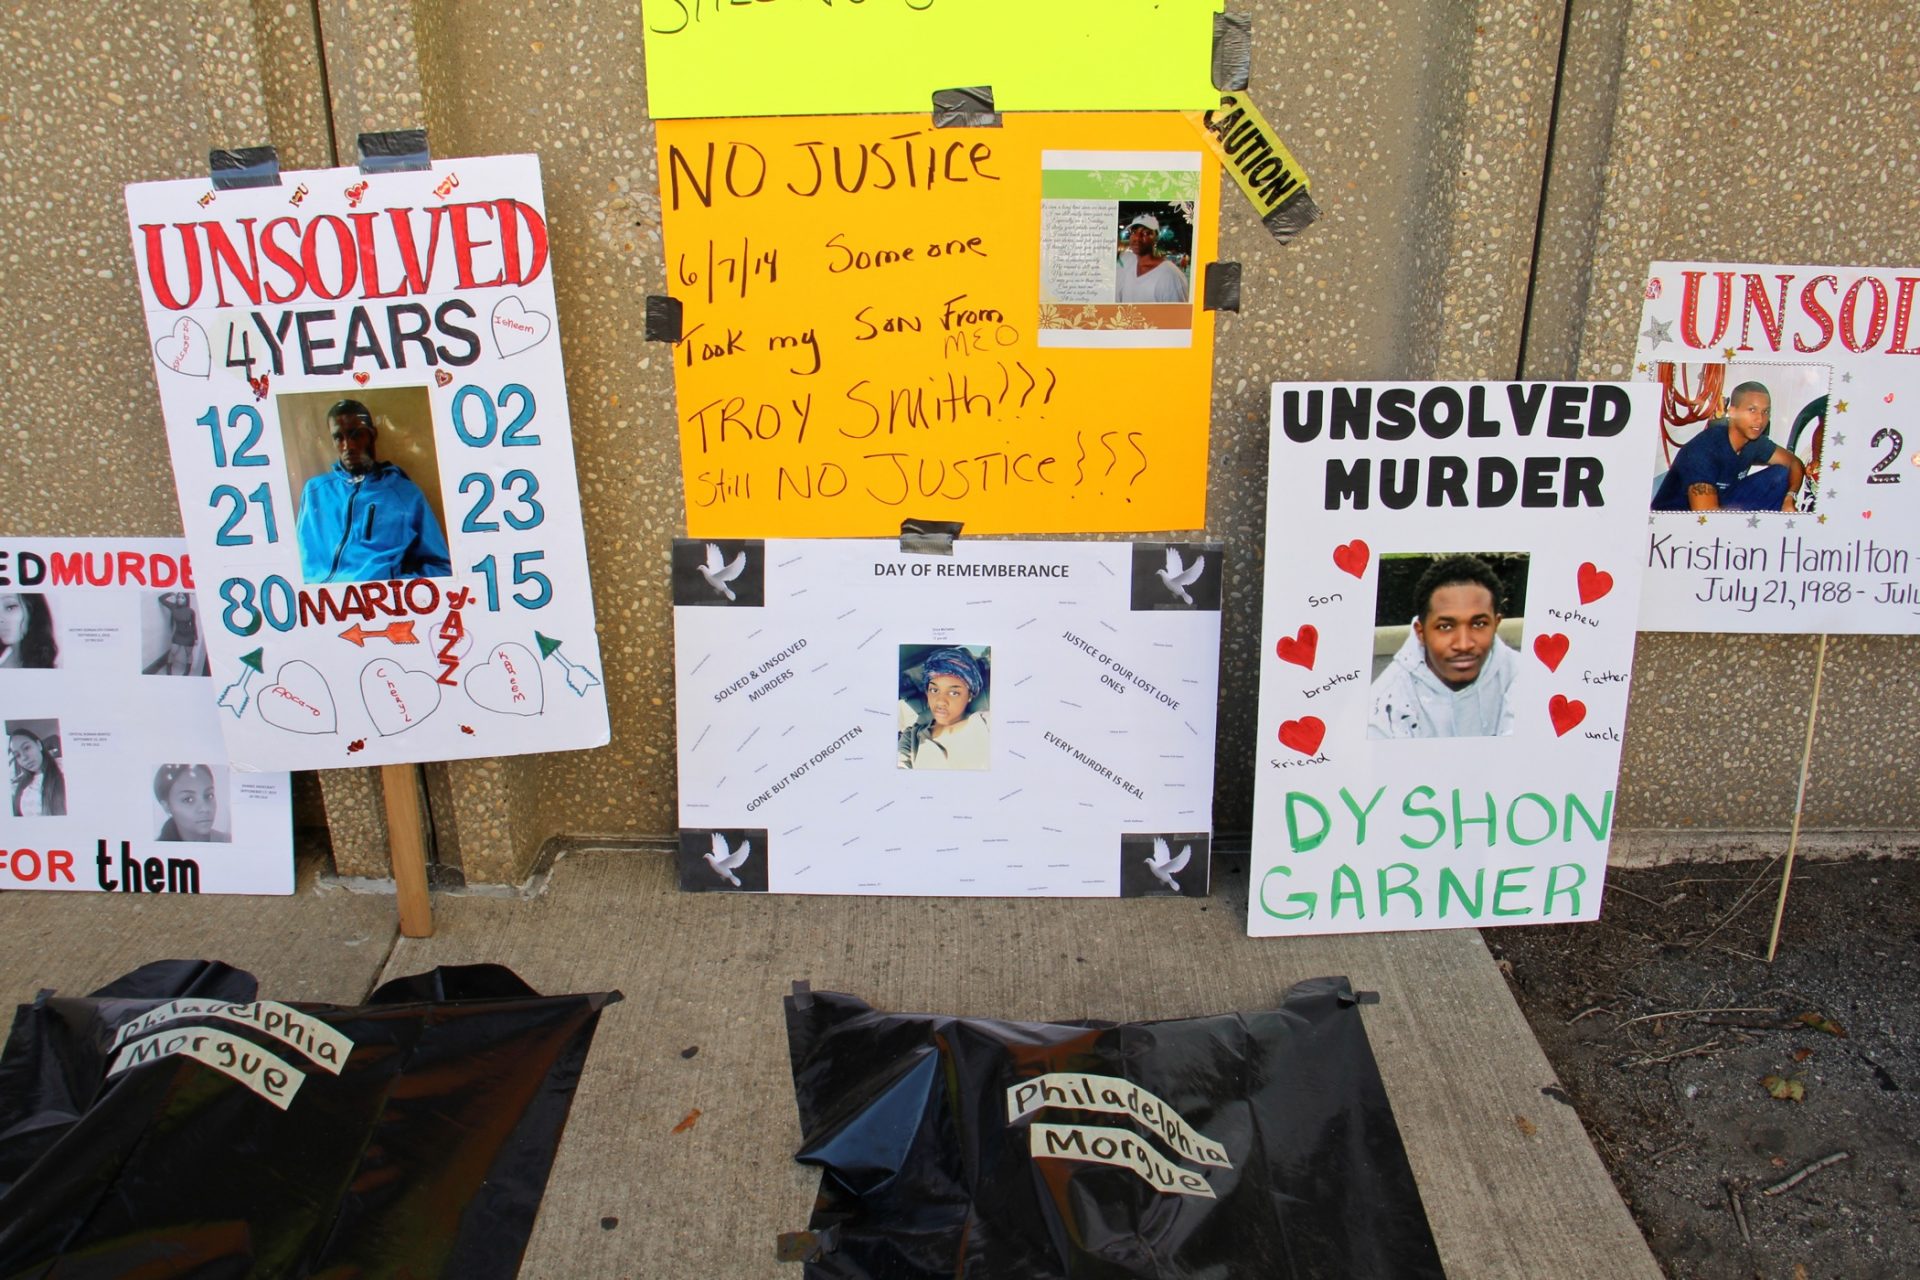 A demonstration outside the Philadelphia police station calls attention to the city's high unsolved murder rate.